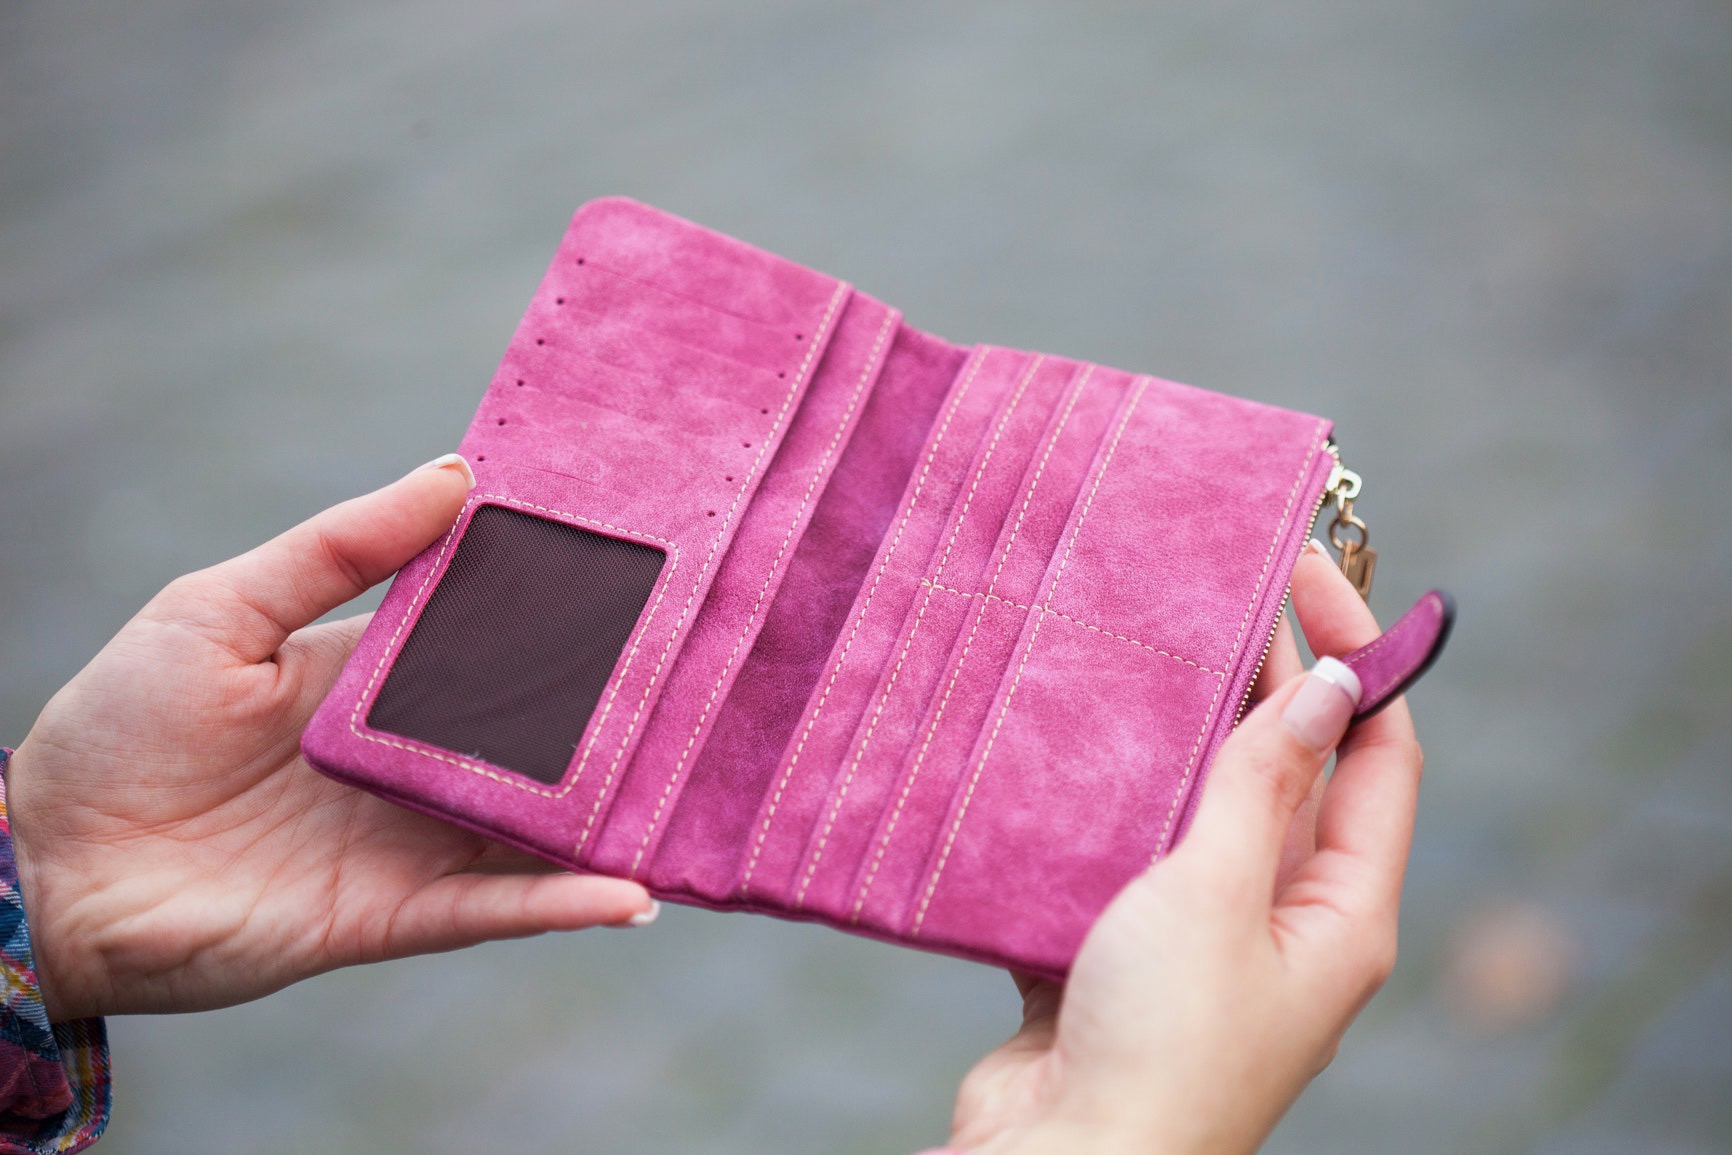 A woman's hands hold open a bright pink purse or wallet.